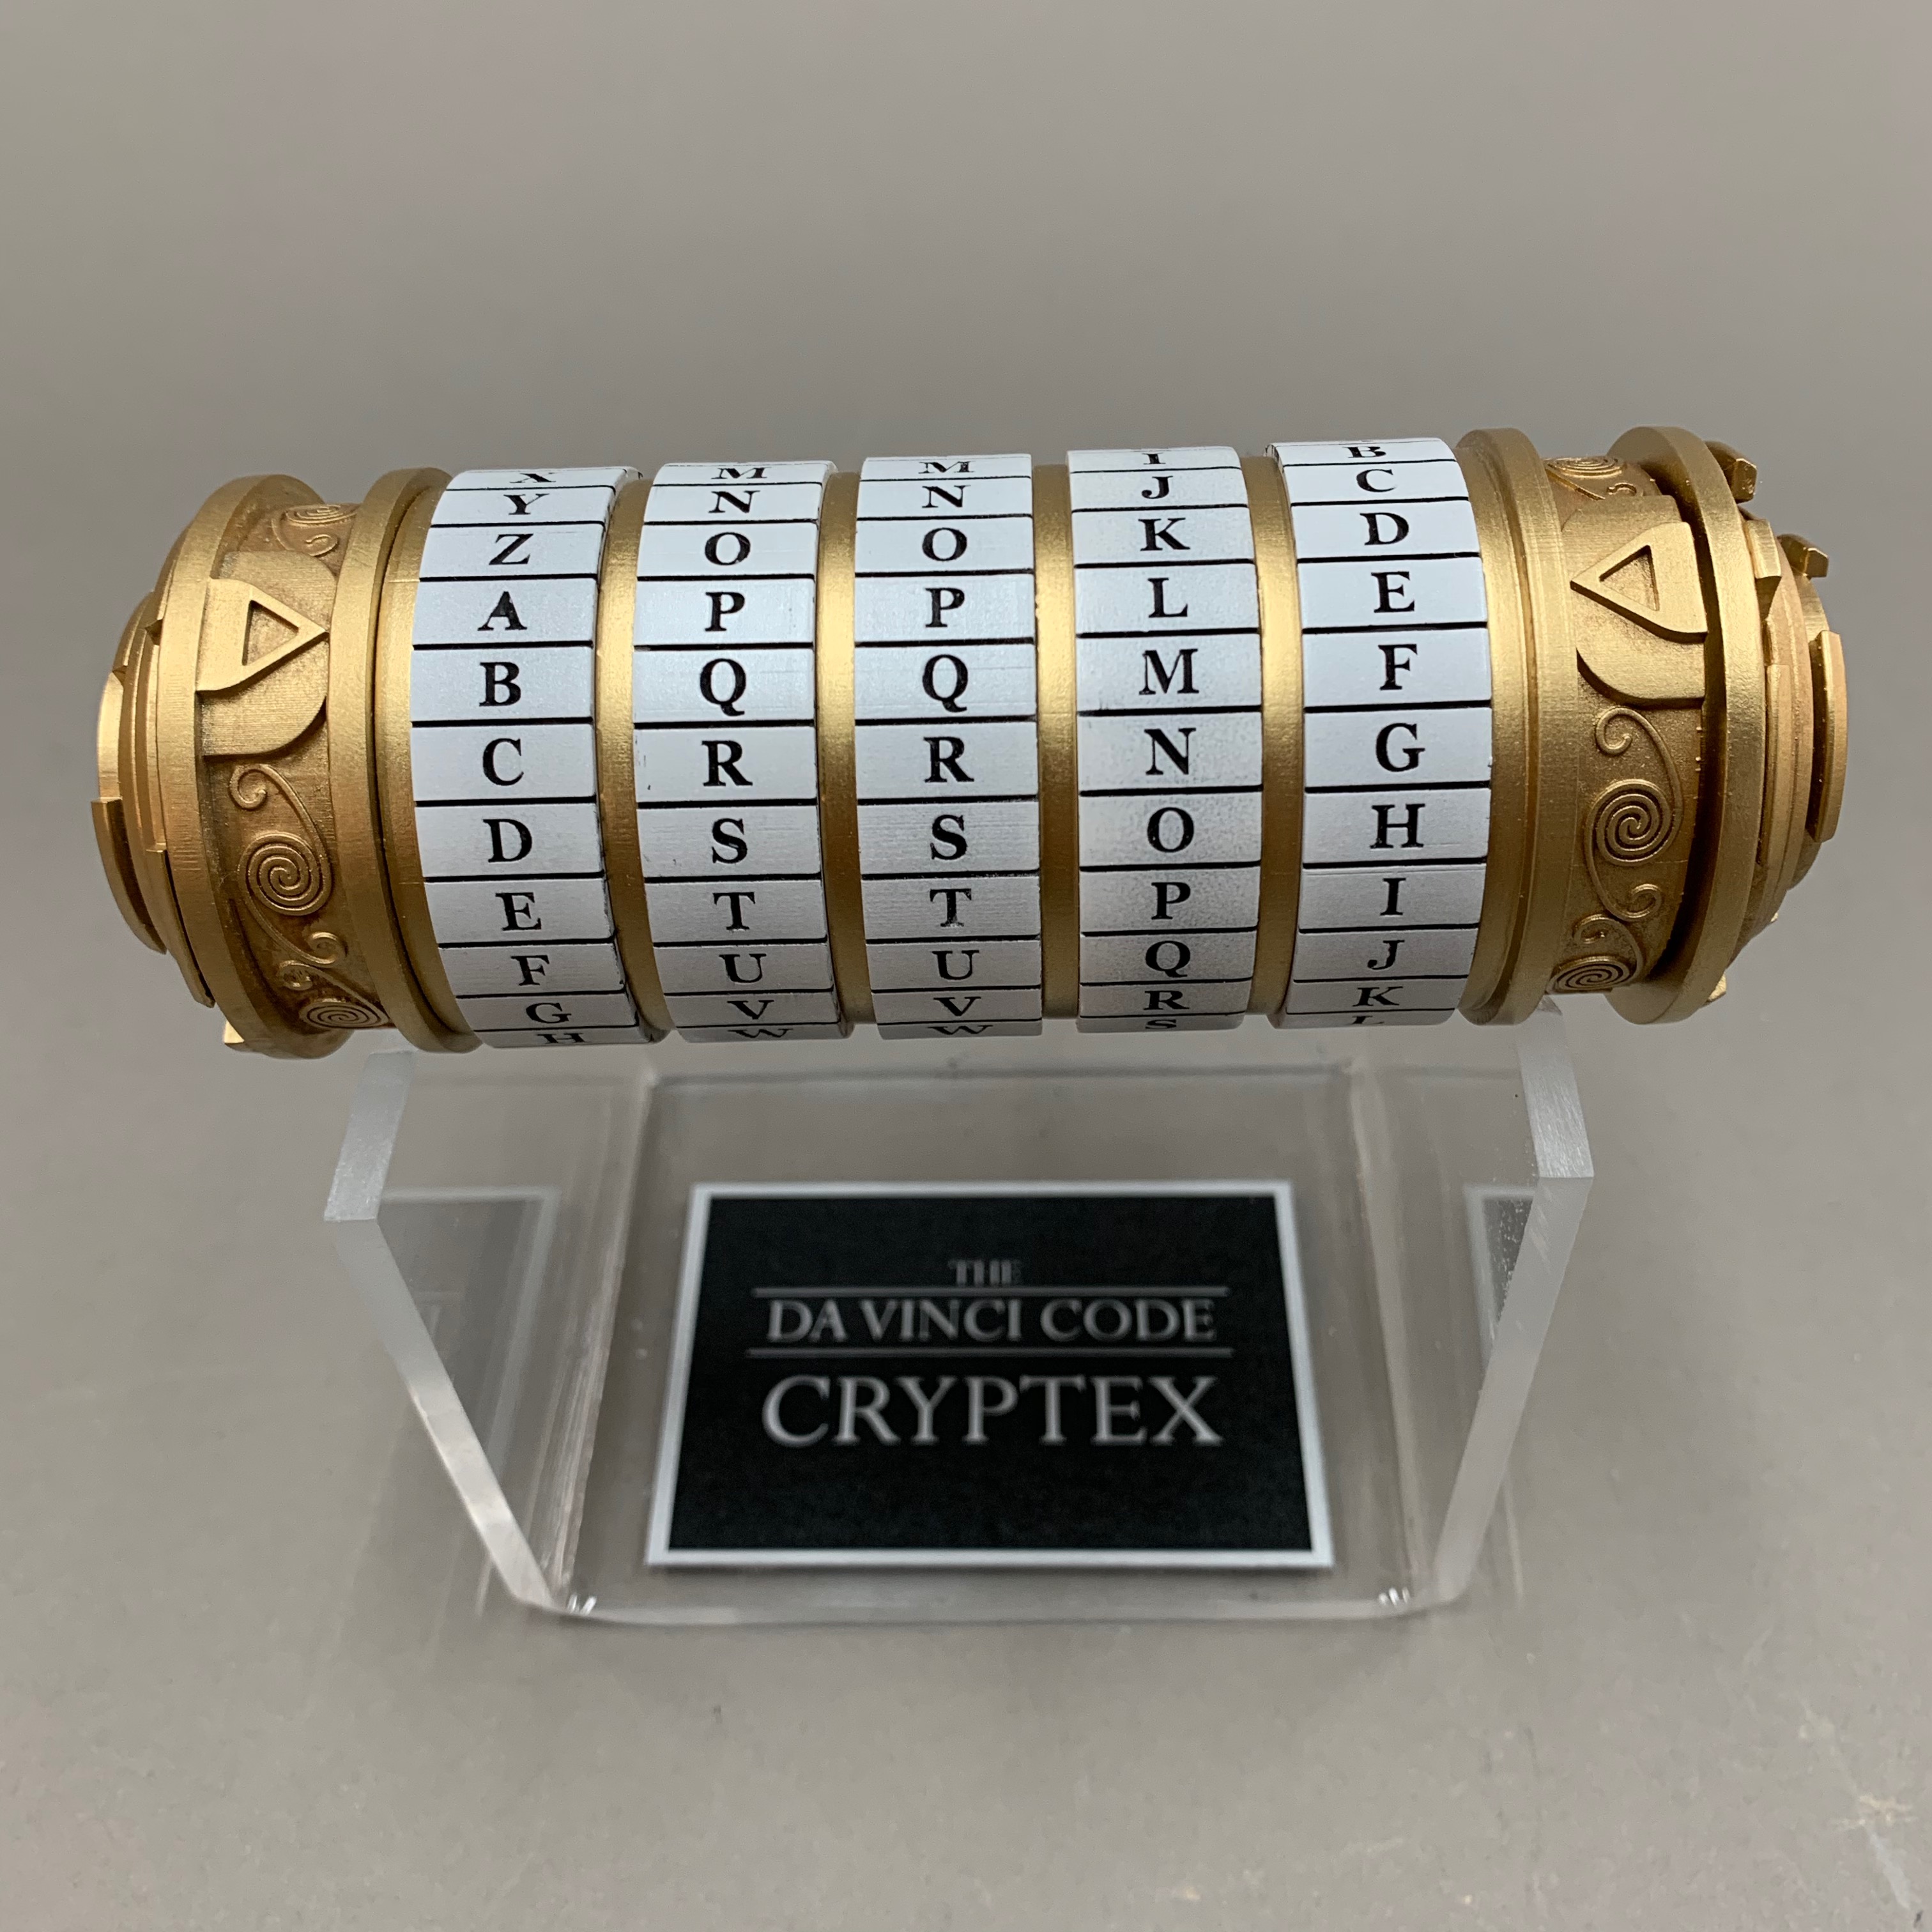 Cryptex Wallpapers